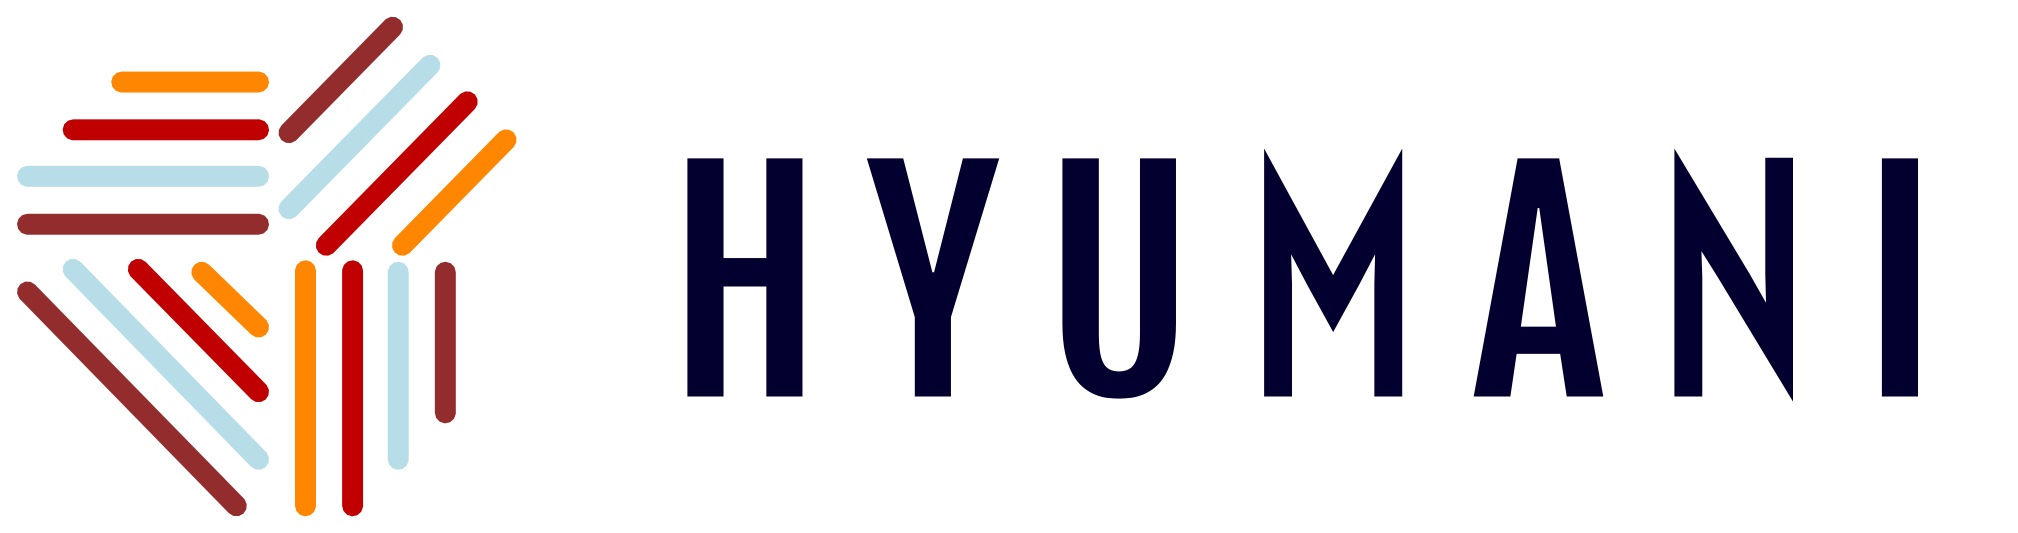 HYUMANI - person's logic, talent, desires, values by wording AI